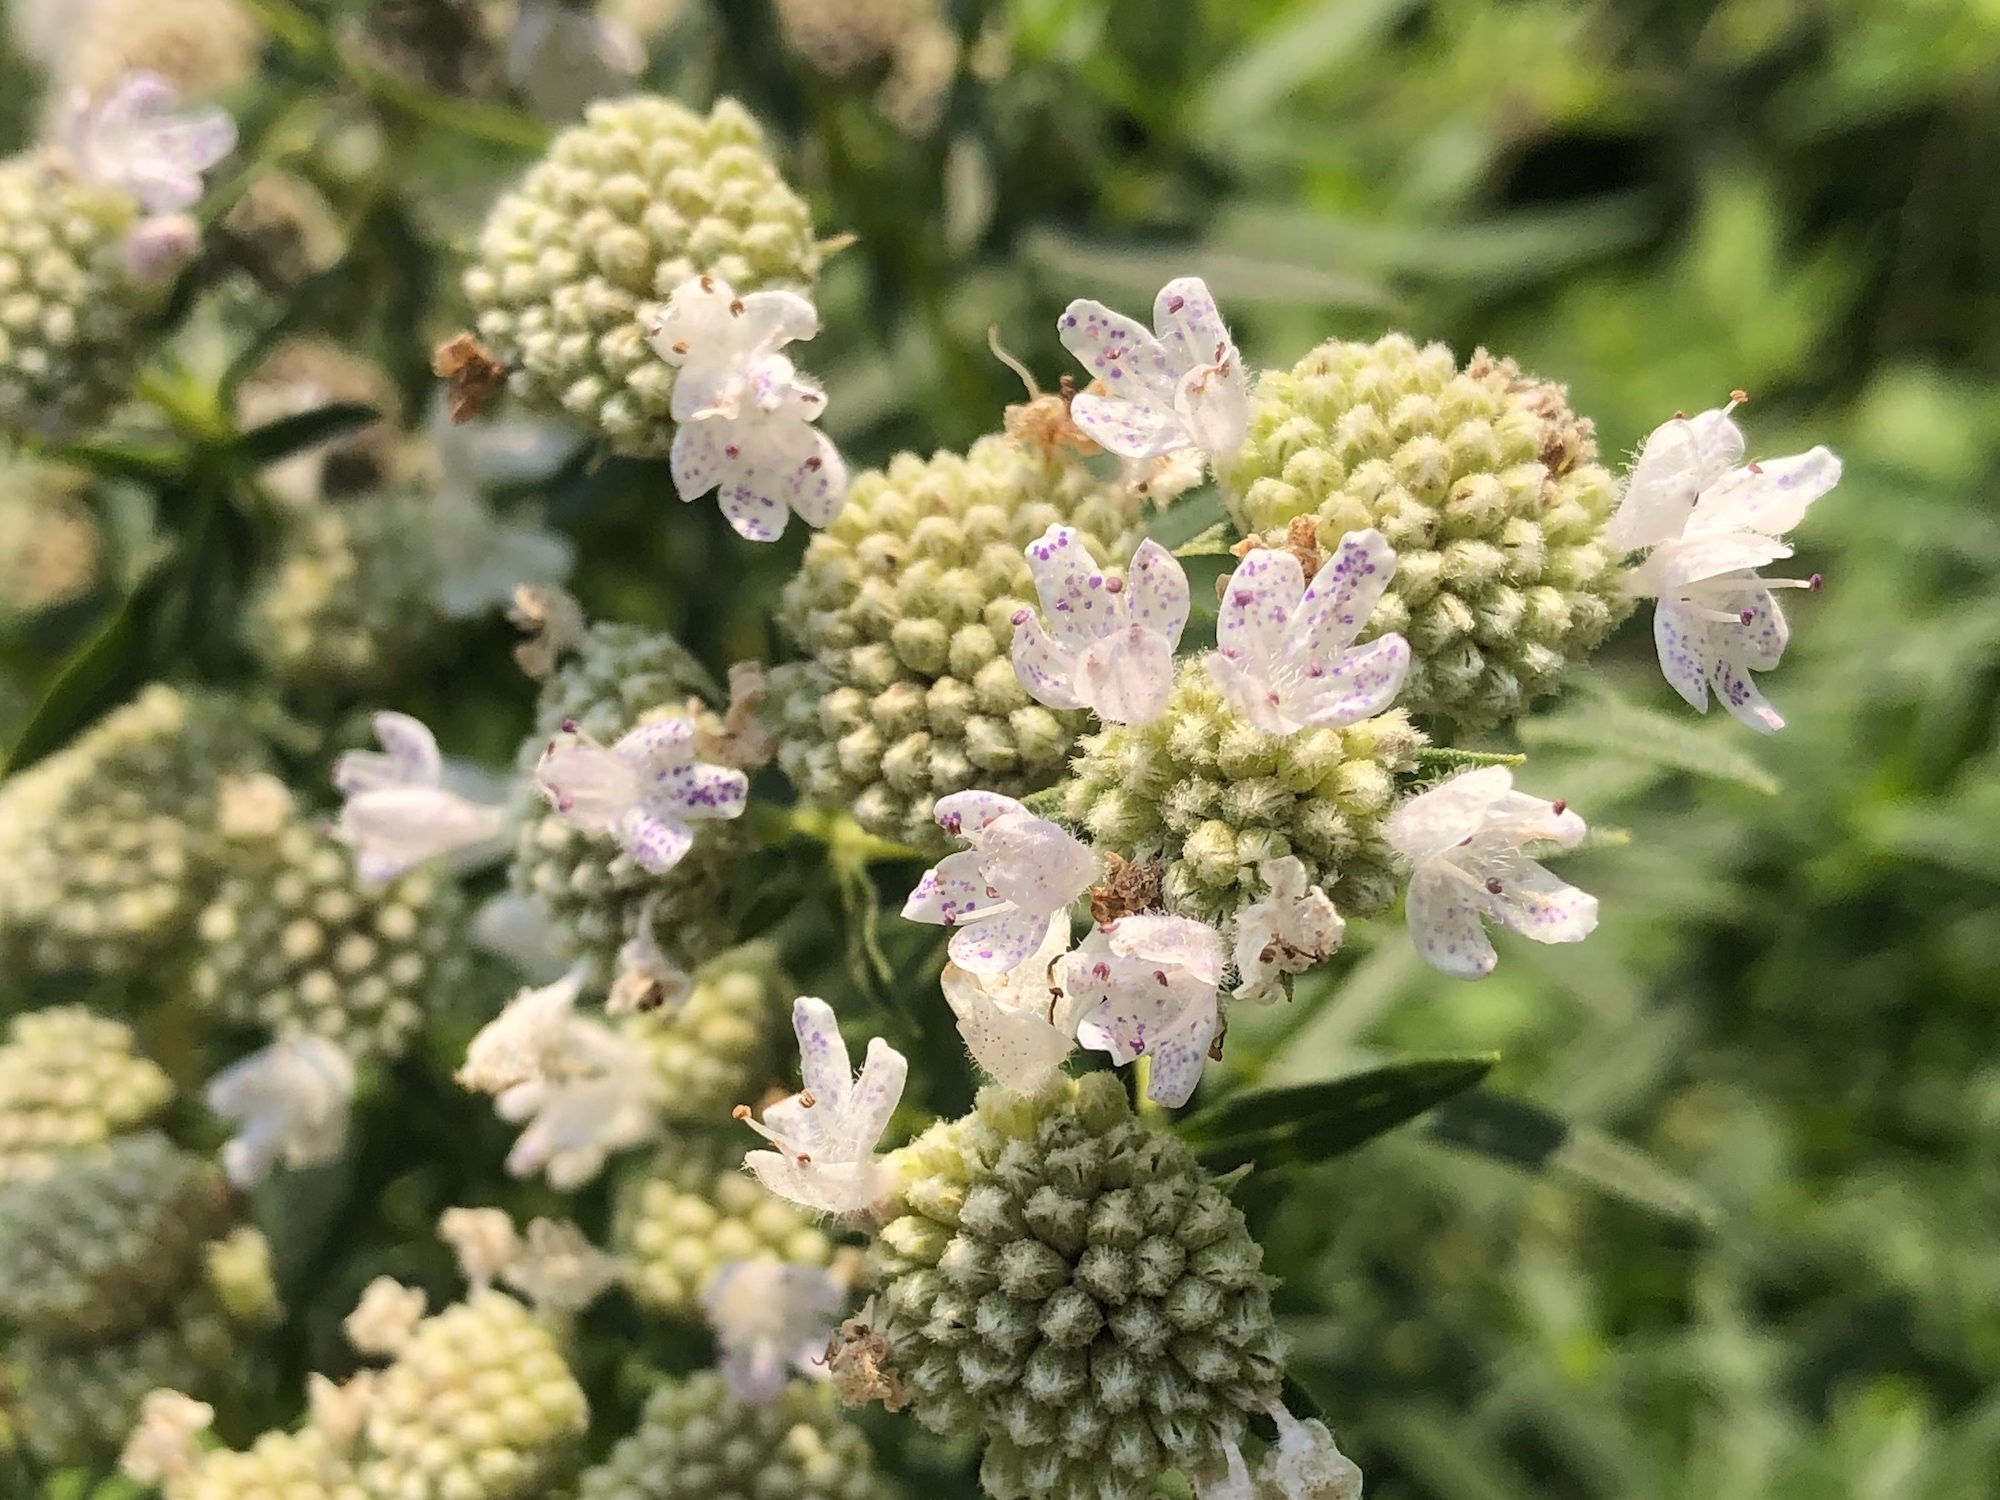 Common Mountain Mint off of Woodrow Street in Madison, Wisconsin on August 1, 2021.